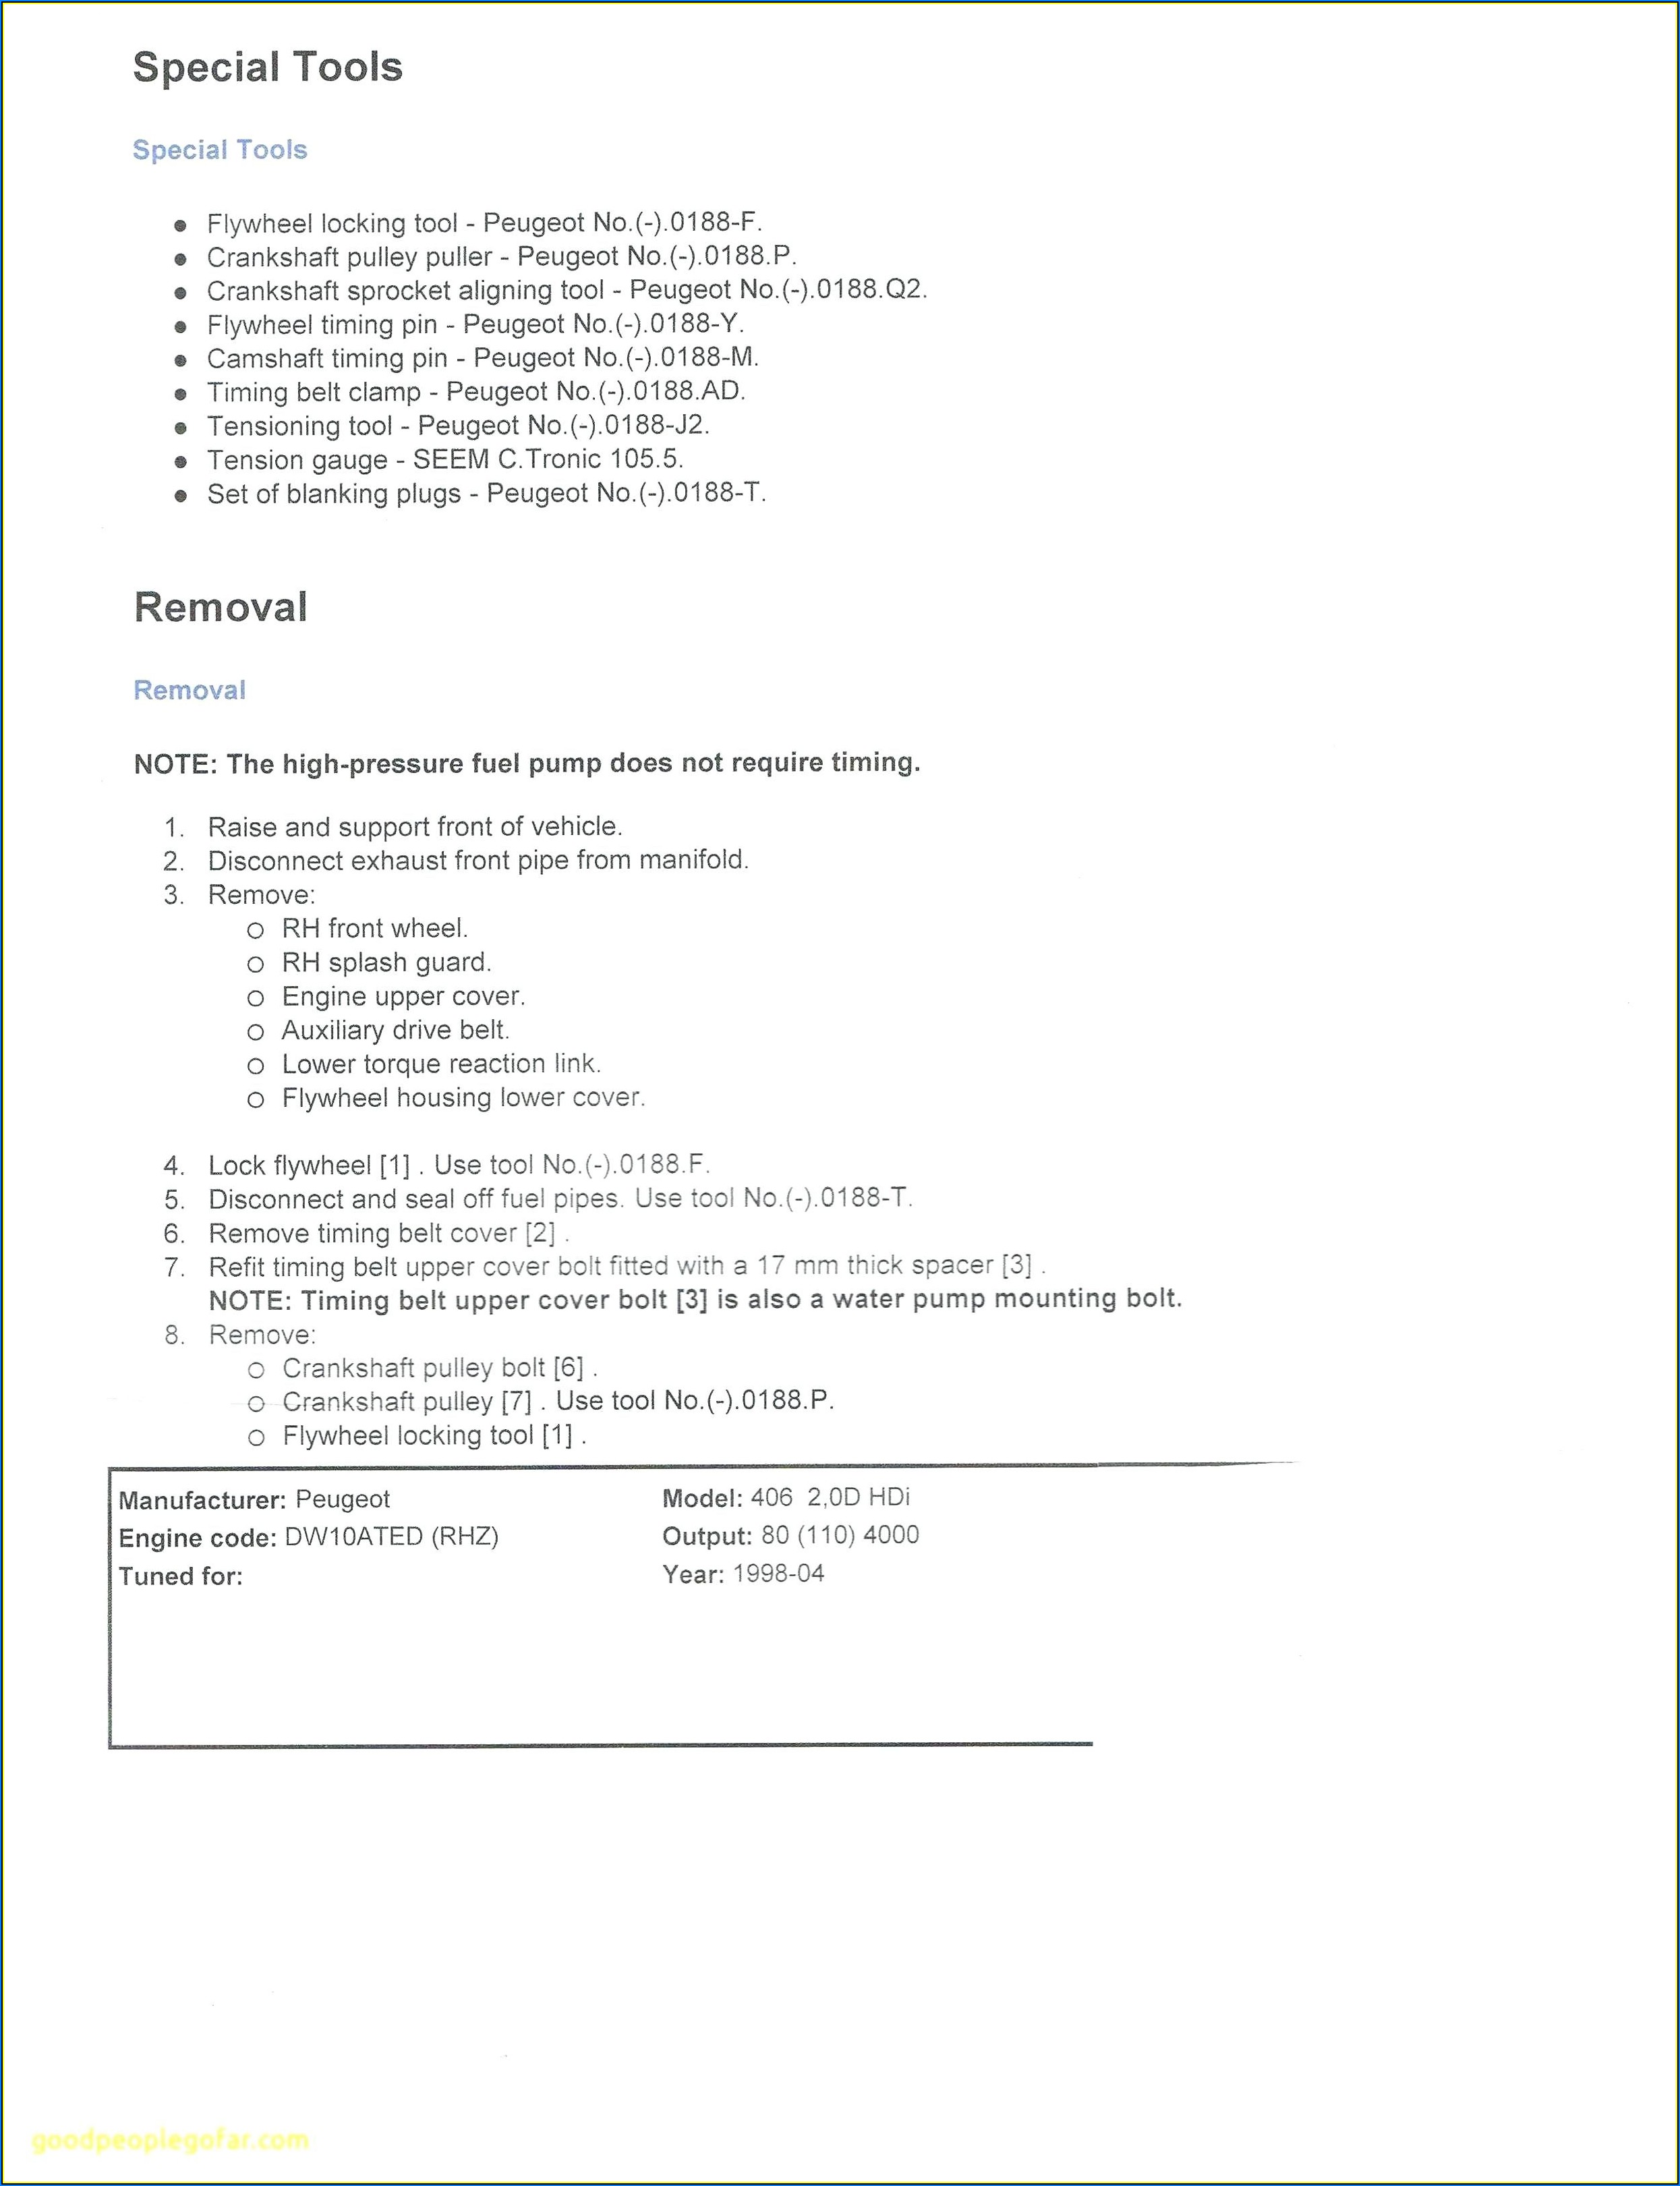 School Counselor Resume Template